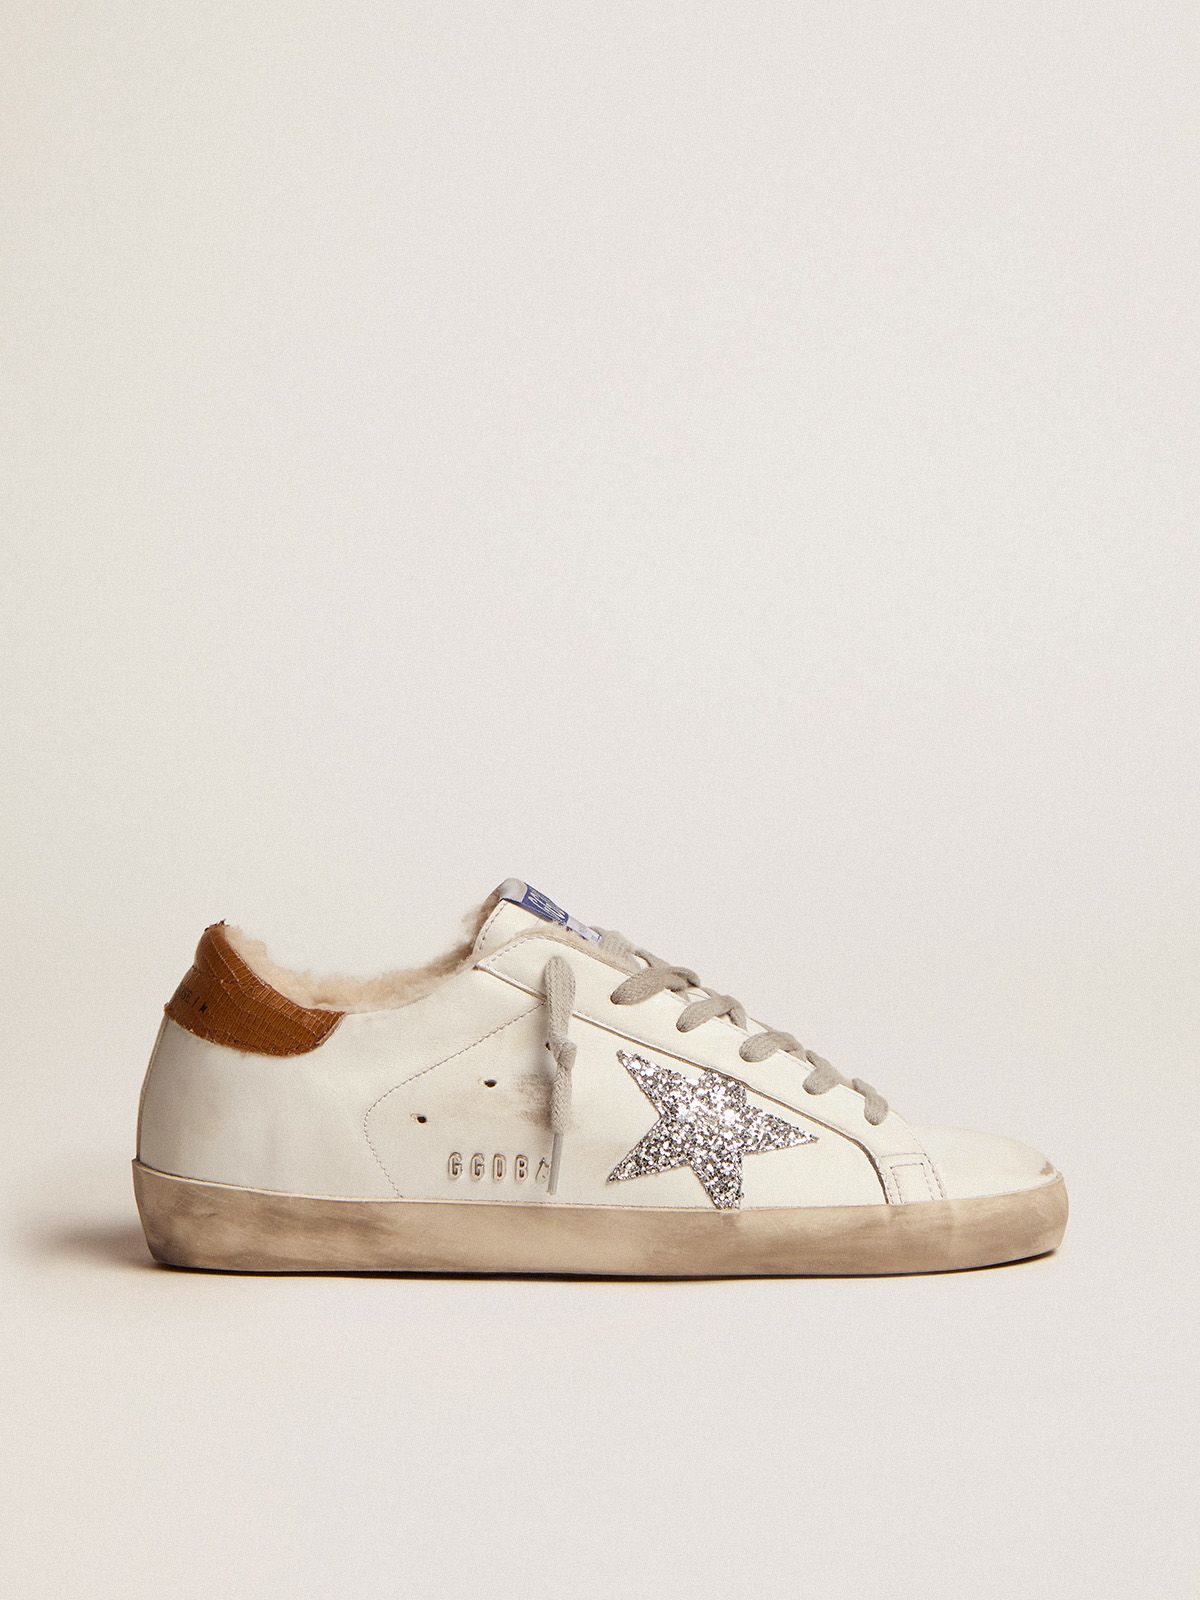 golden goose Super-Star star sneakers silver glitter tab dove-gray with lizard-print leather shearling lining, and heel